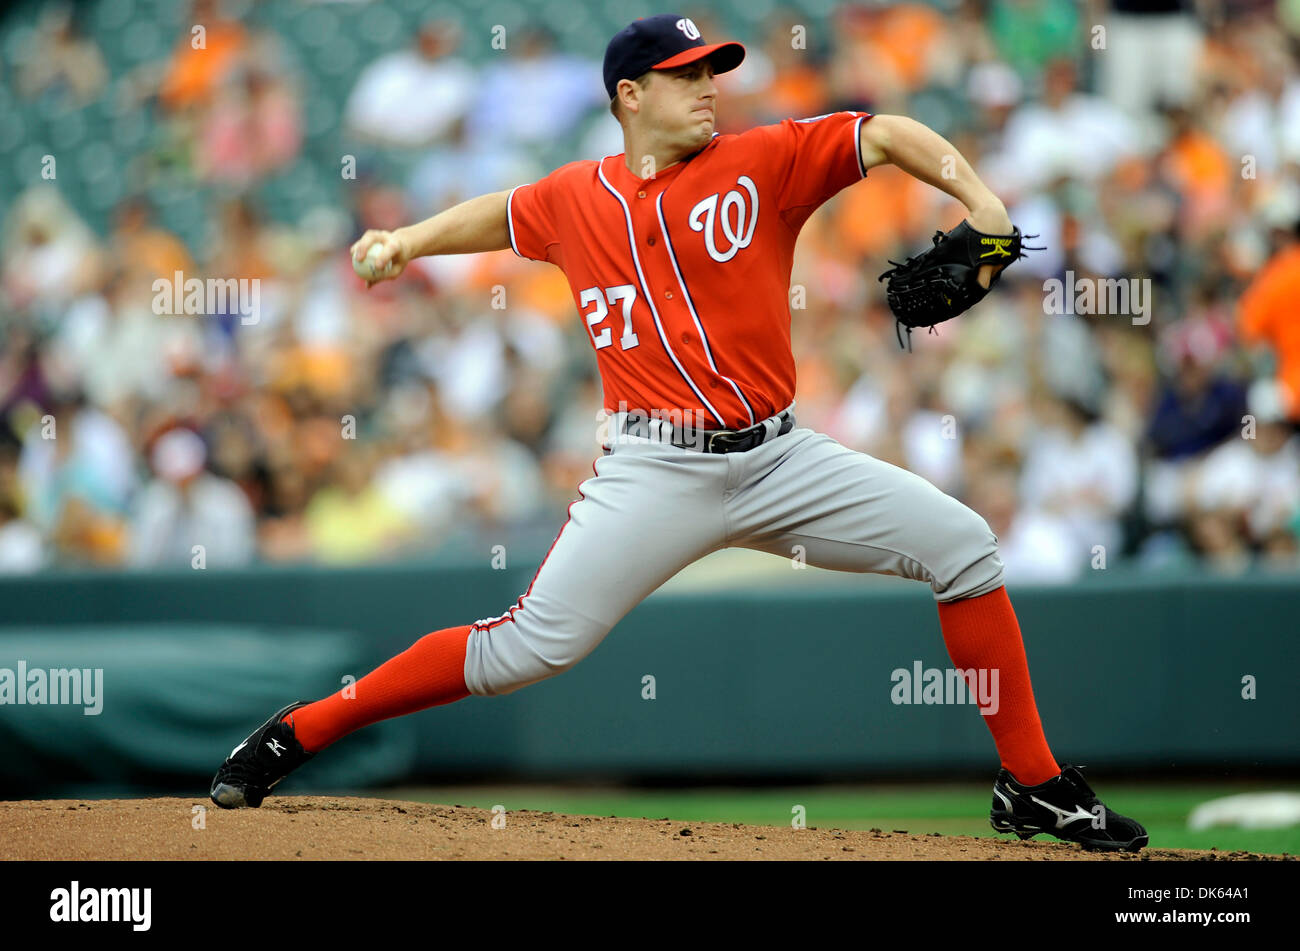 May 22, 2011 - Baltimore, Maryland, U.S - Washington Nationals starting Pitcher Jordan Zimmermann  (27) pitches during a game between the Baltimore Orioles and the Washington Nationals, the Nationals lead 1-0 in the bottom of the 4th inning  (Credit Image: © TJ Root/Southcreek Global/ZUMApress.com) Stock Photo